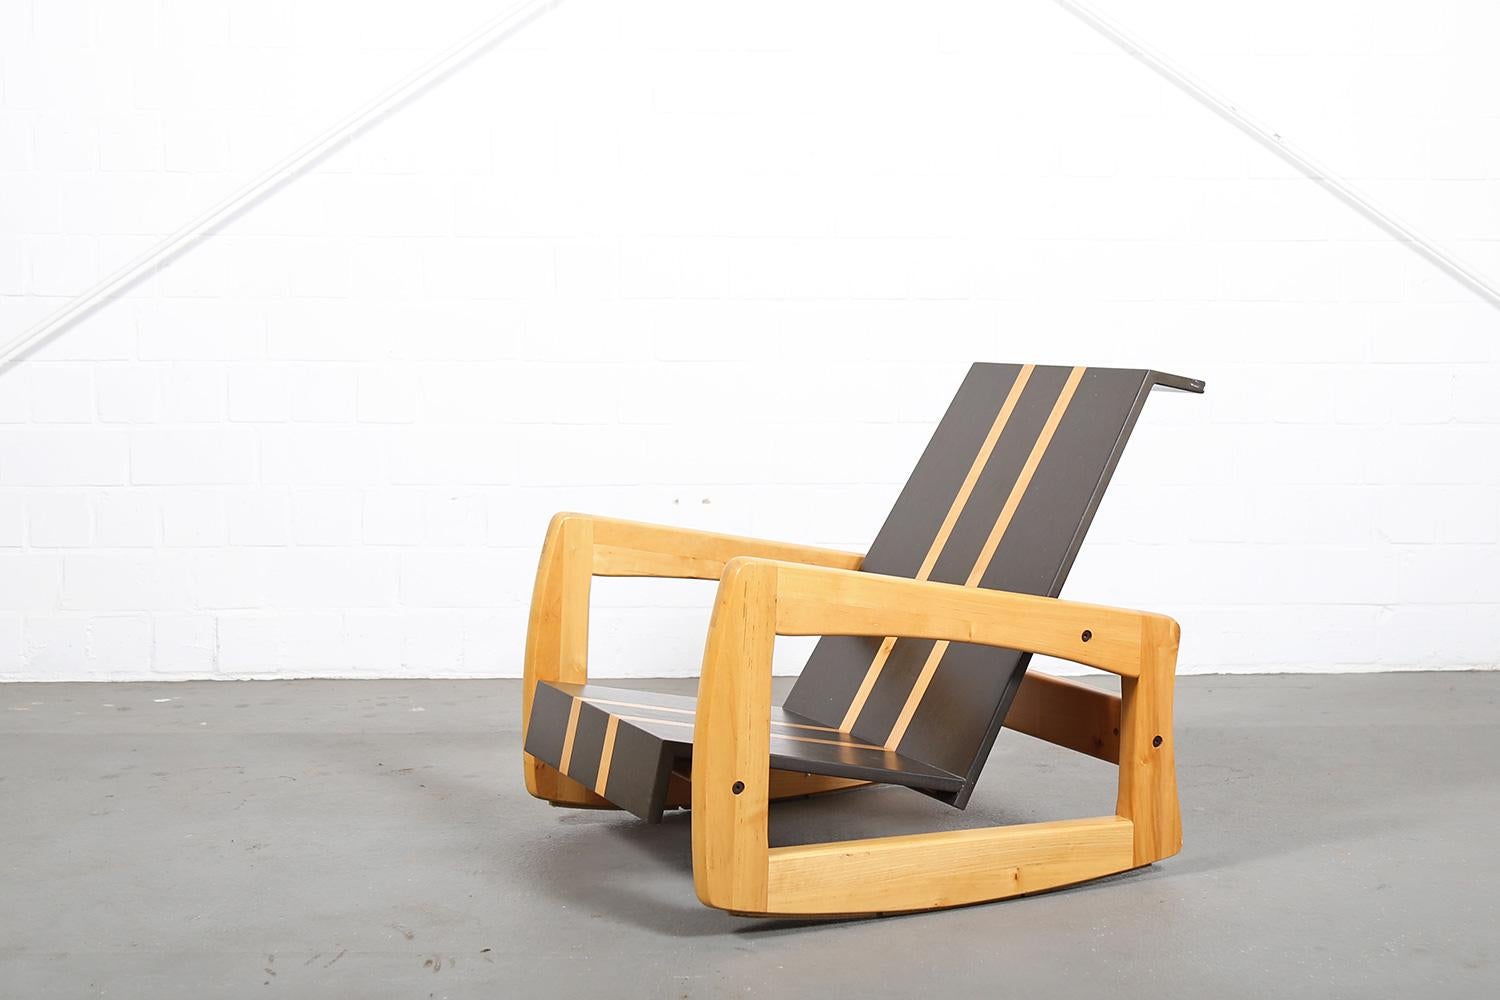 A sculptural rocking chair made of pine designed like an oldschool surfboard, probably designed in the 70s. Nice woodworking.